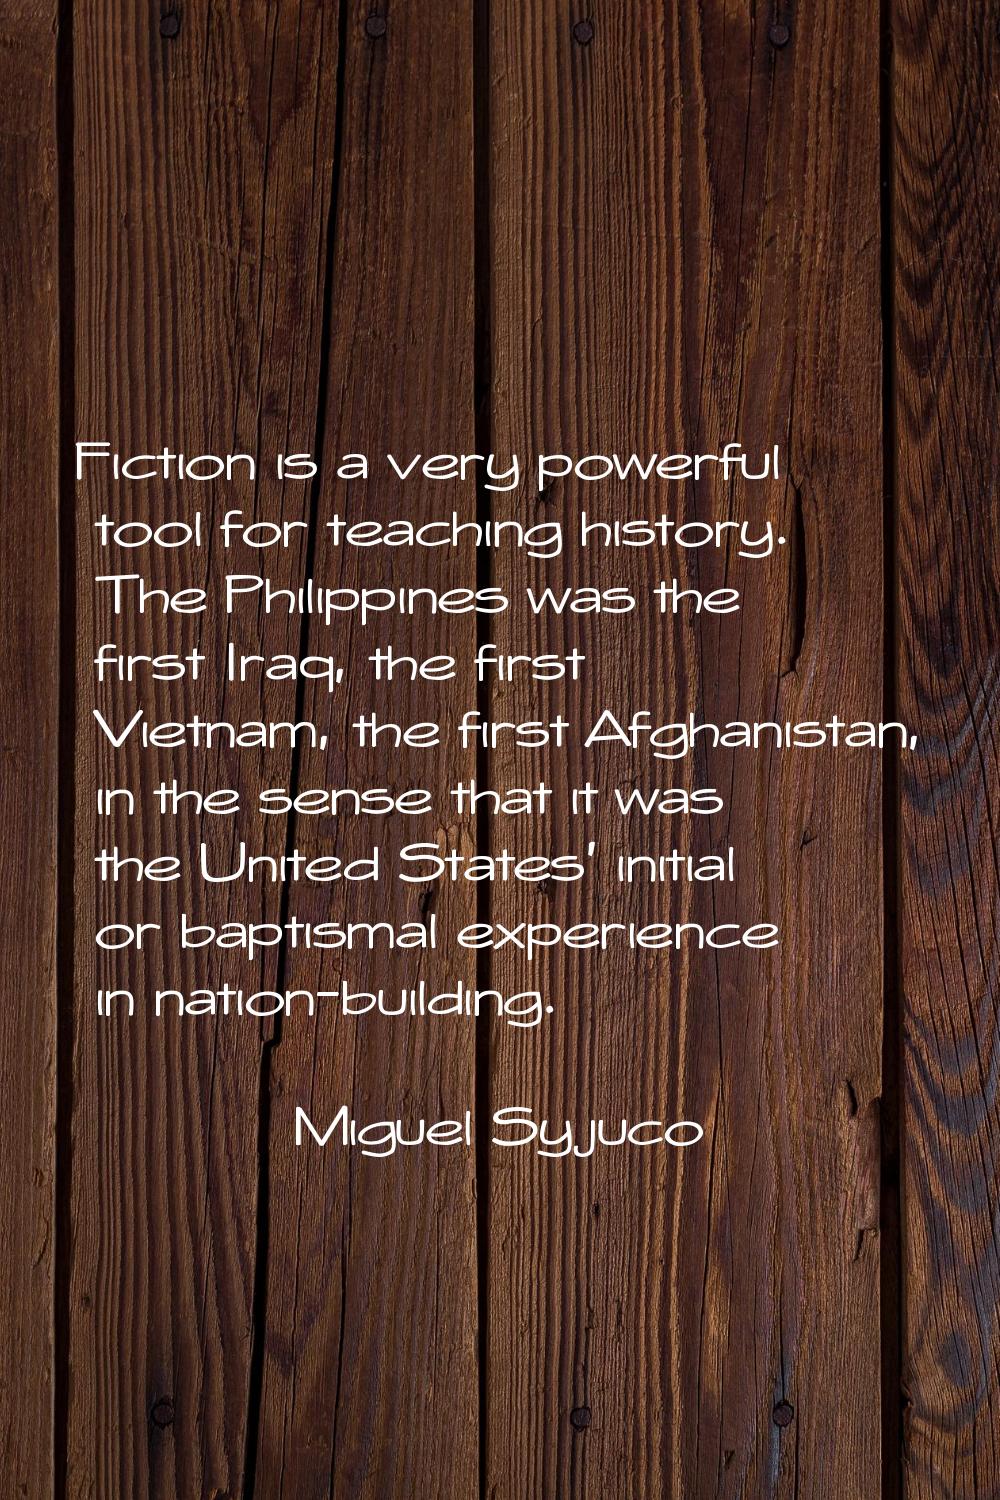 Fiction is a very powerful tool for teaching history. The Philippines was the first Iraq, the first